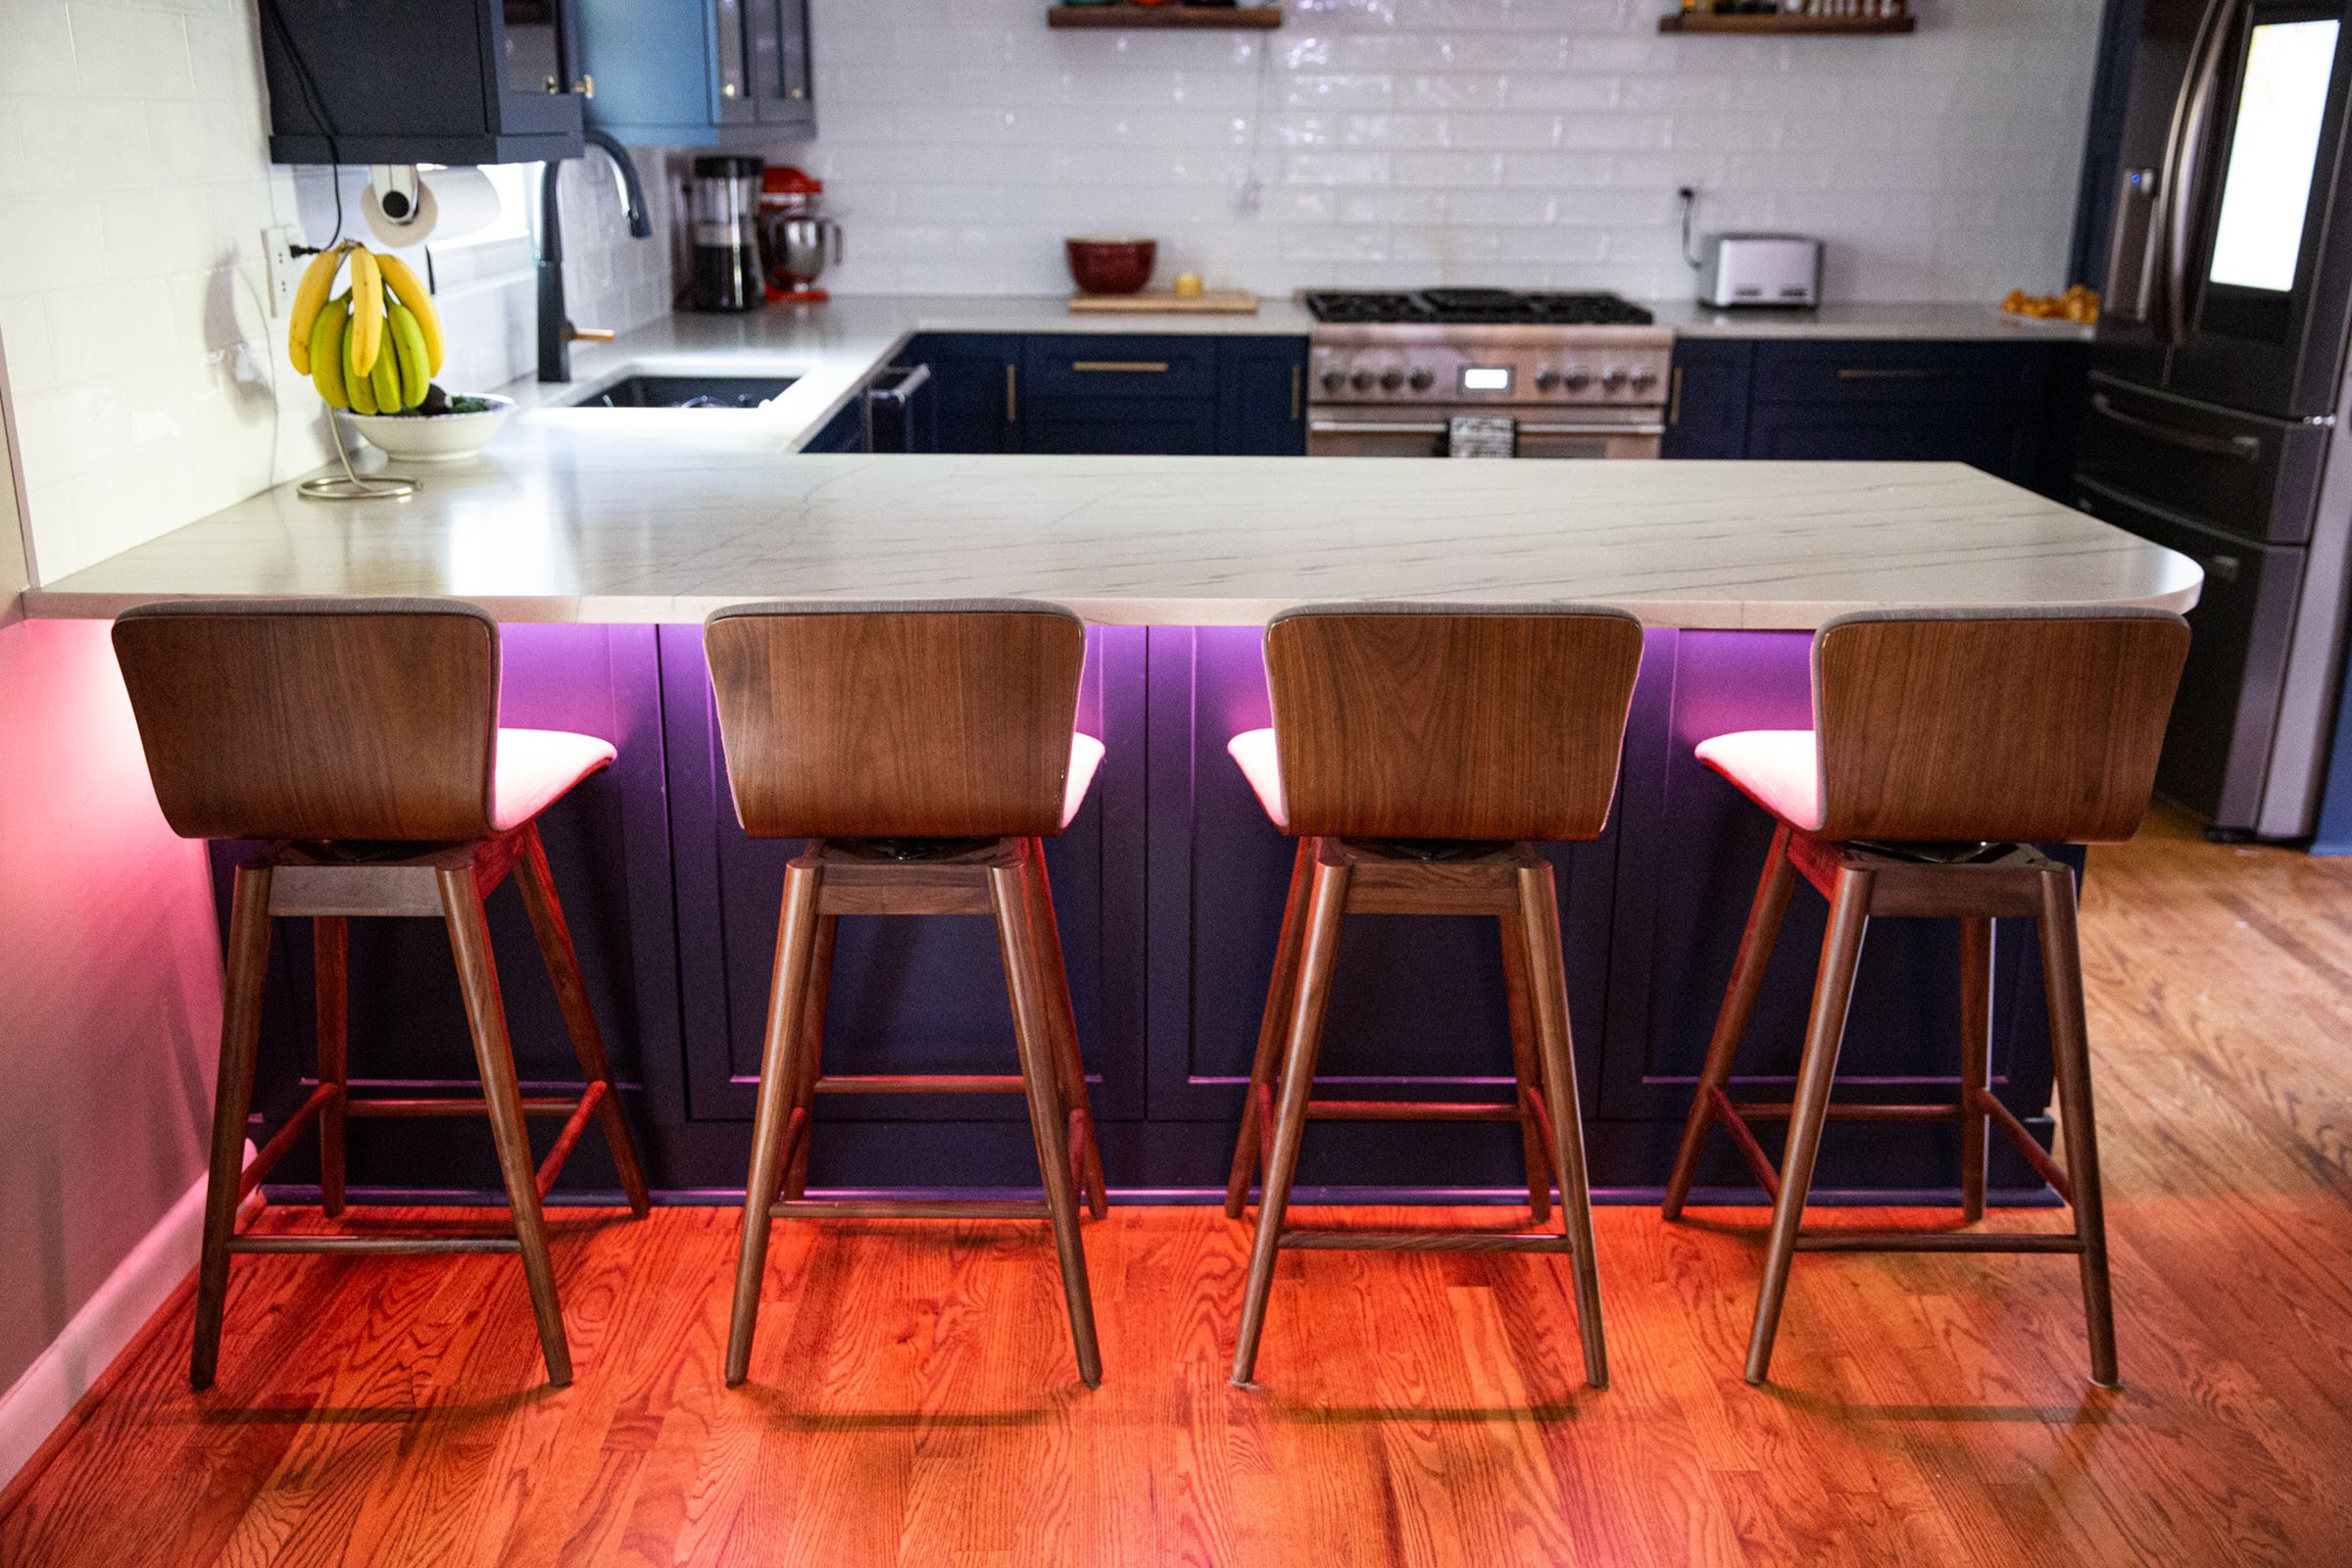 Kitchen counter with pink lights